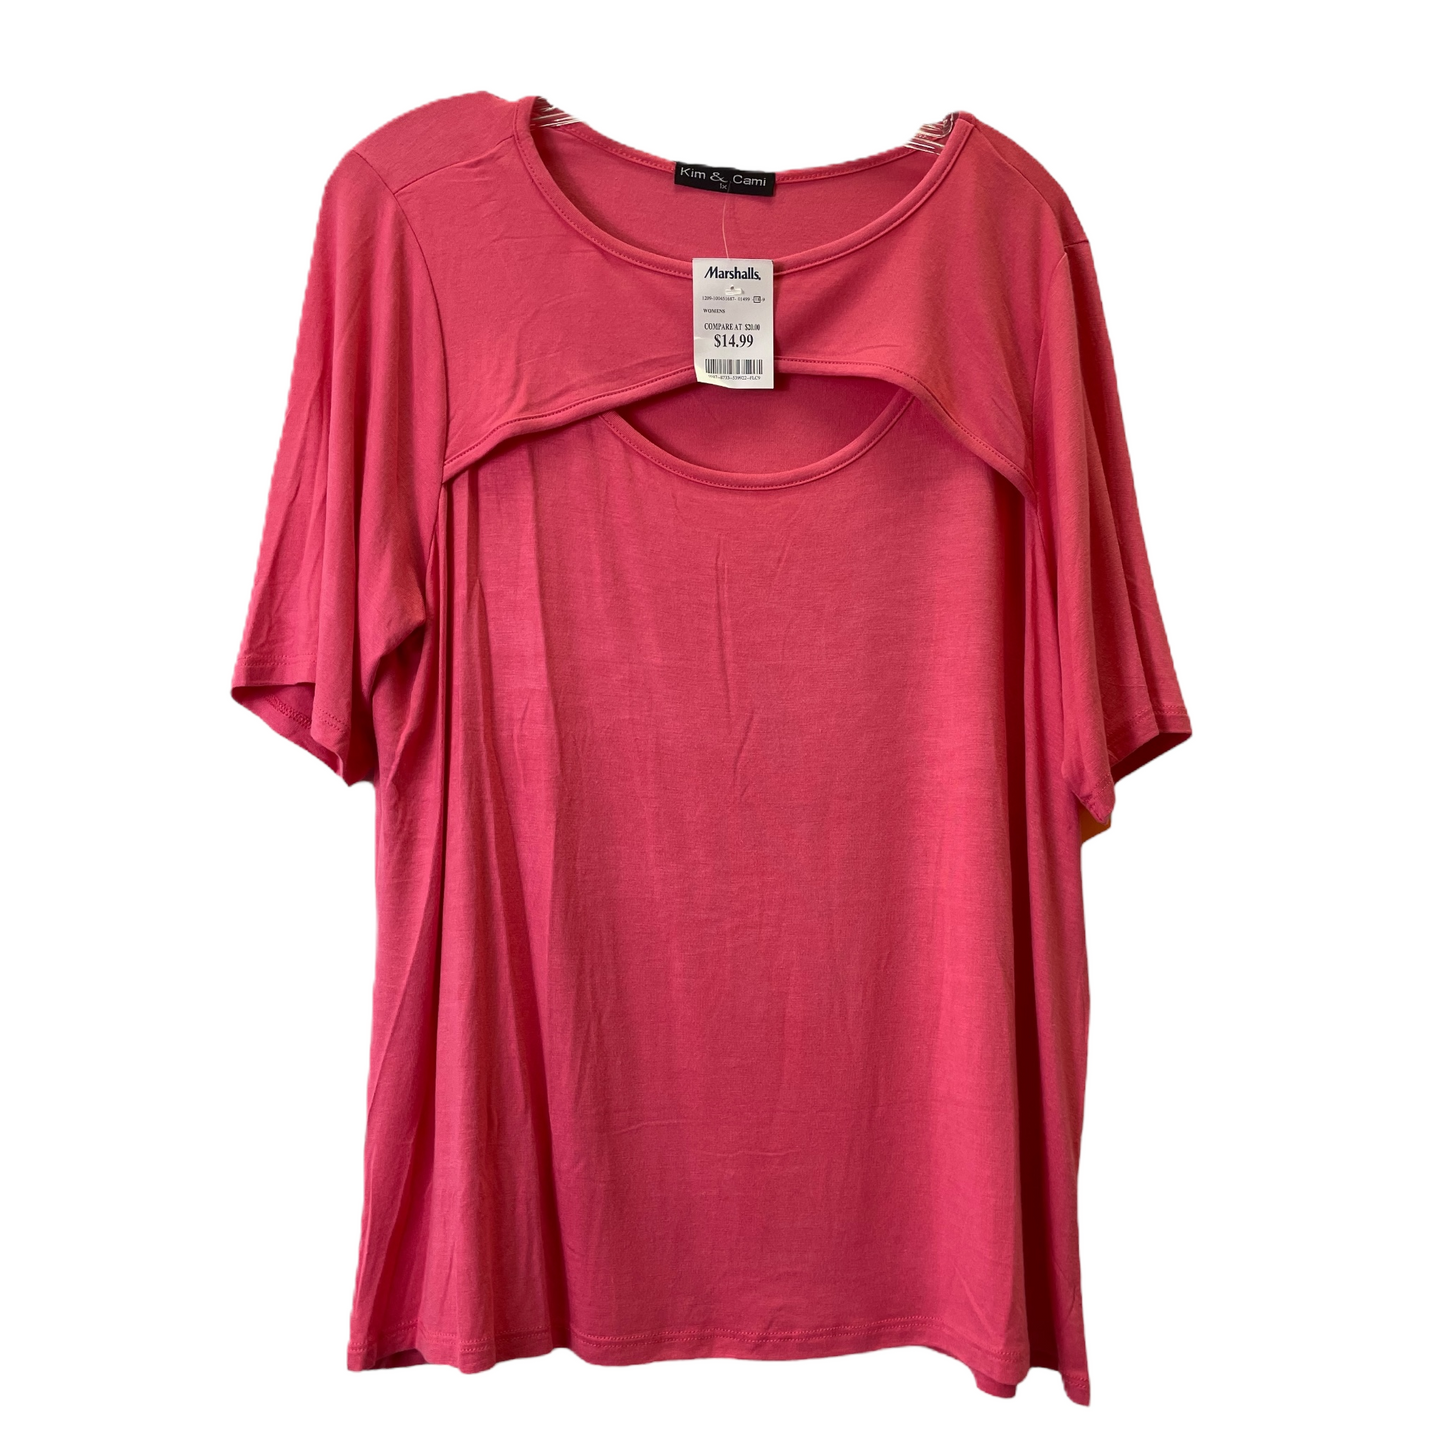 Pink Top Short Sleeve By Kim & Cami, Size: 1x